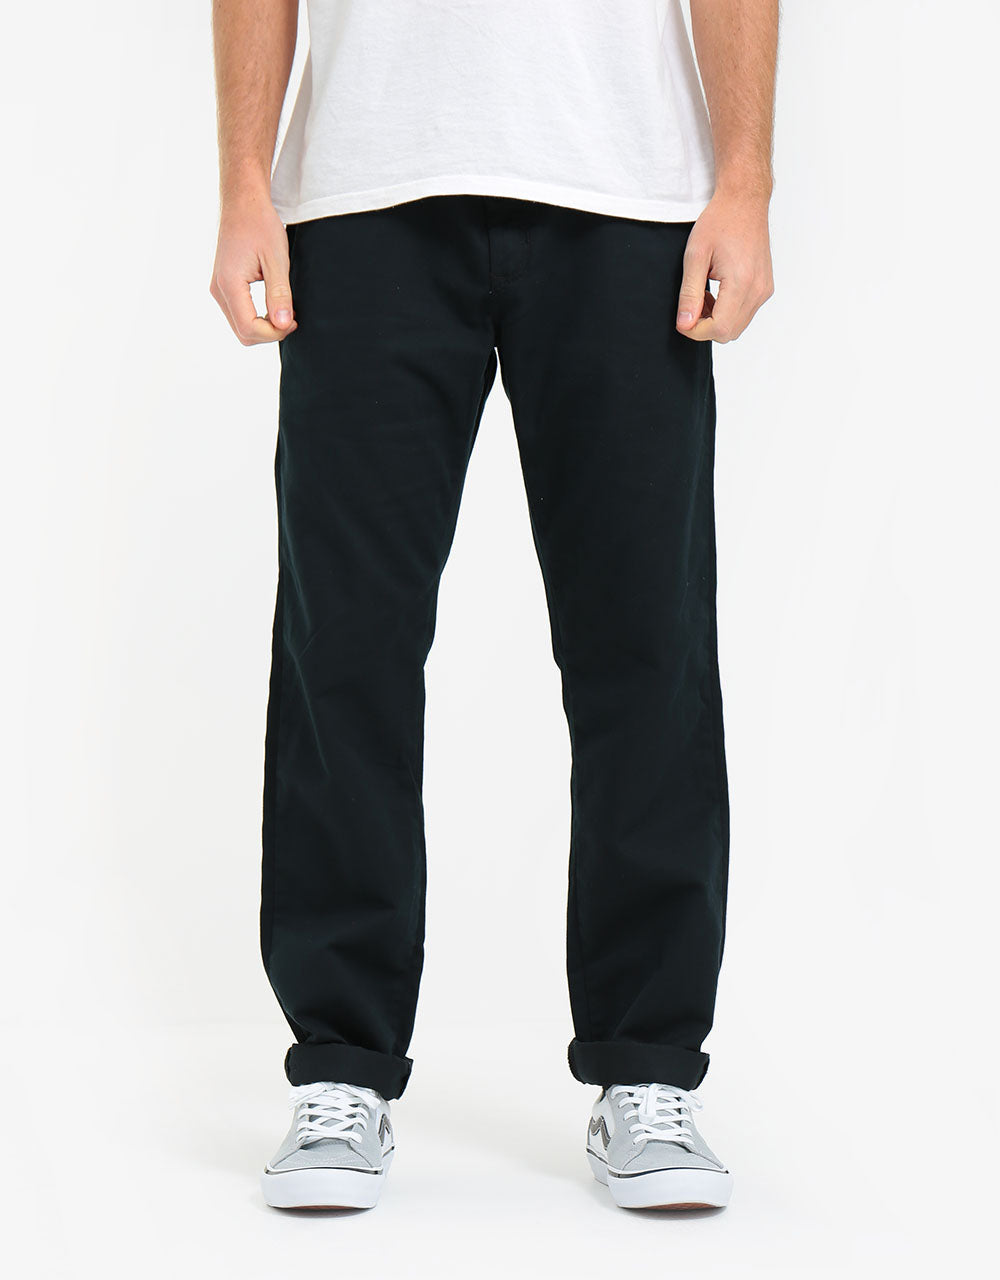 Vans Authentic Chino Stretch Trousers - Black